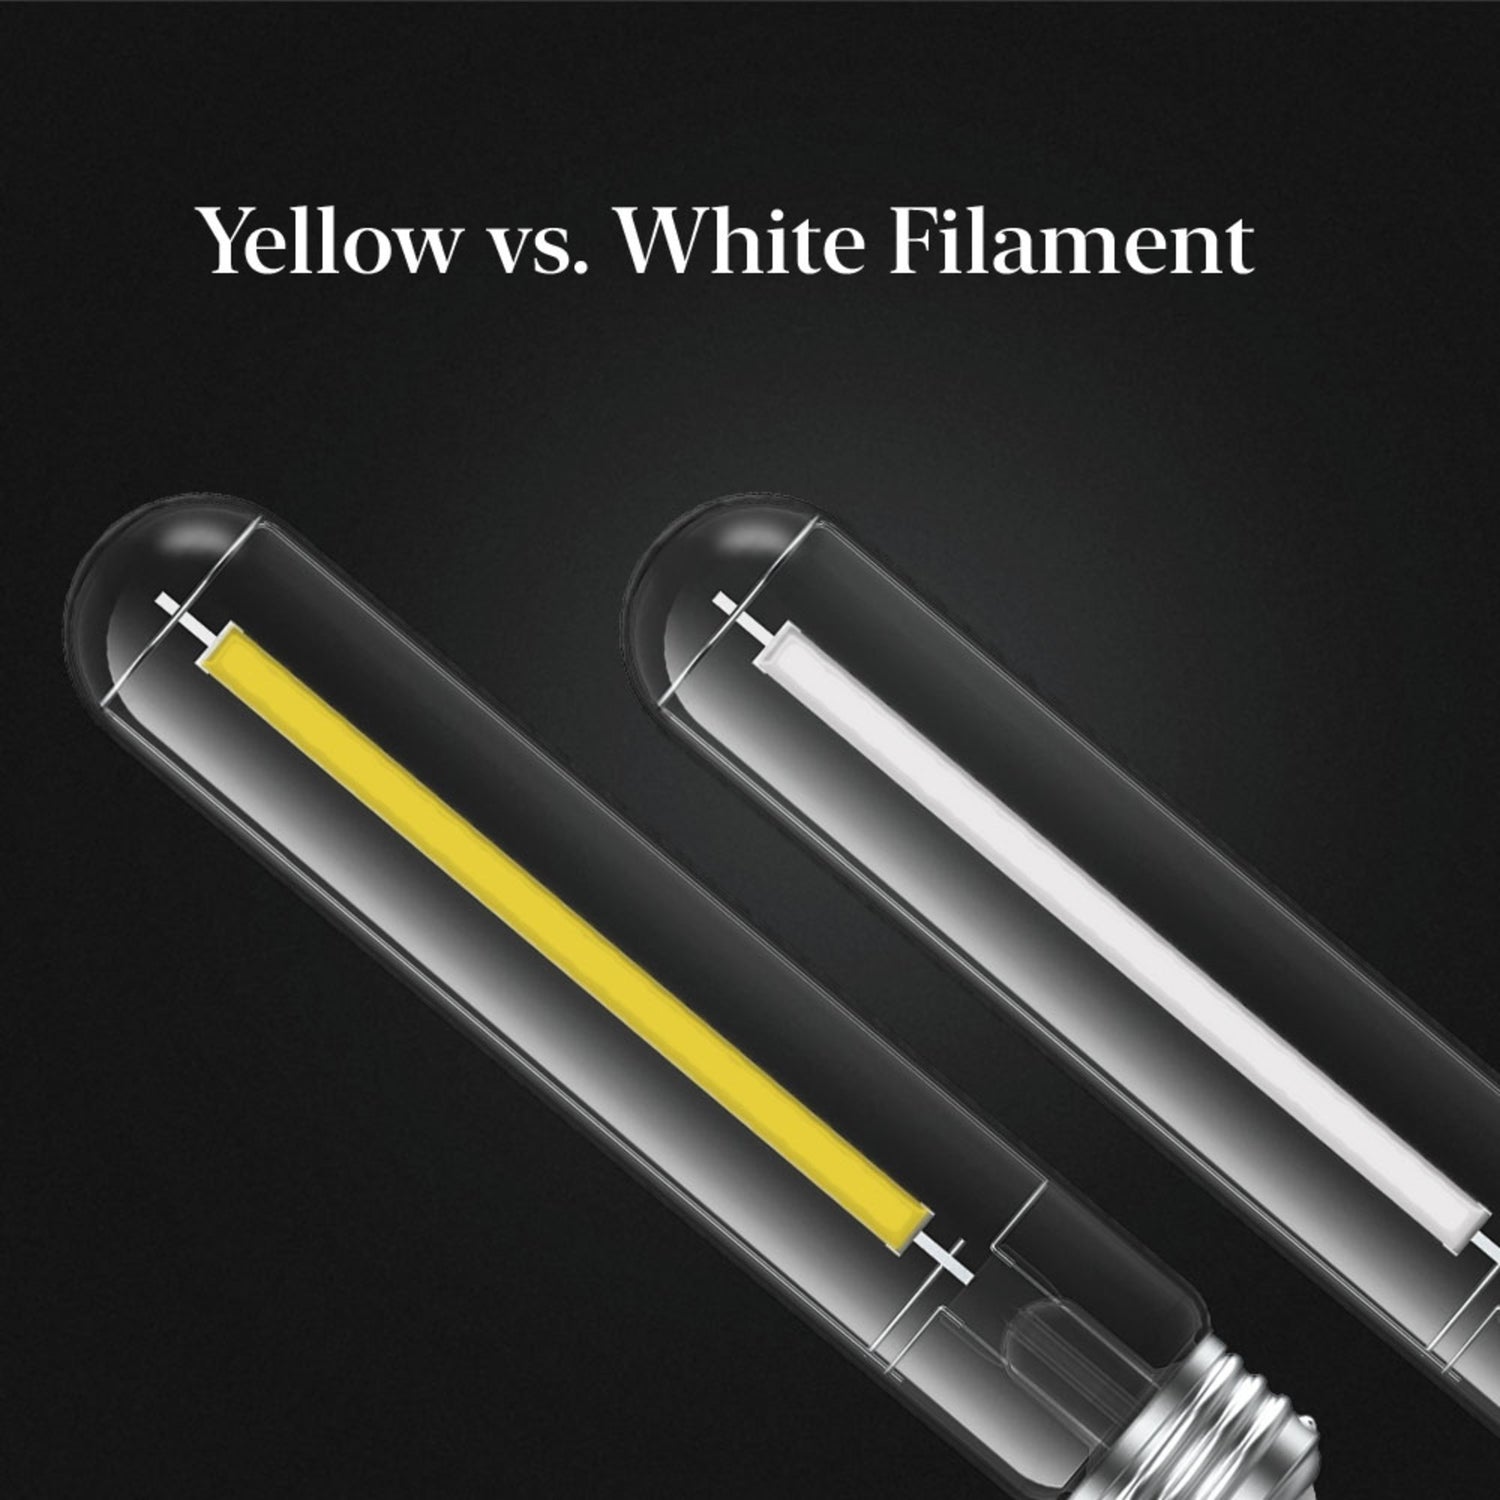 8.8W (60W Replacement) Soft White (2700K) E26 Base T10 Exposed White Filament LED (4-Pack)